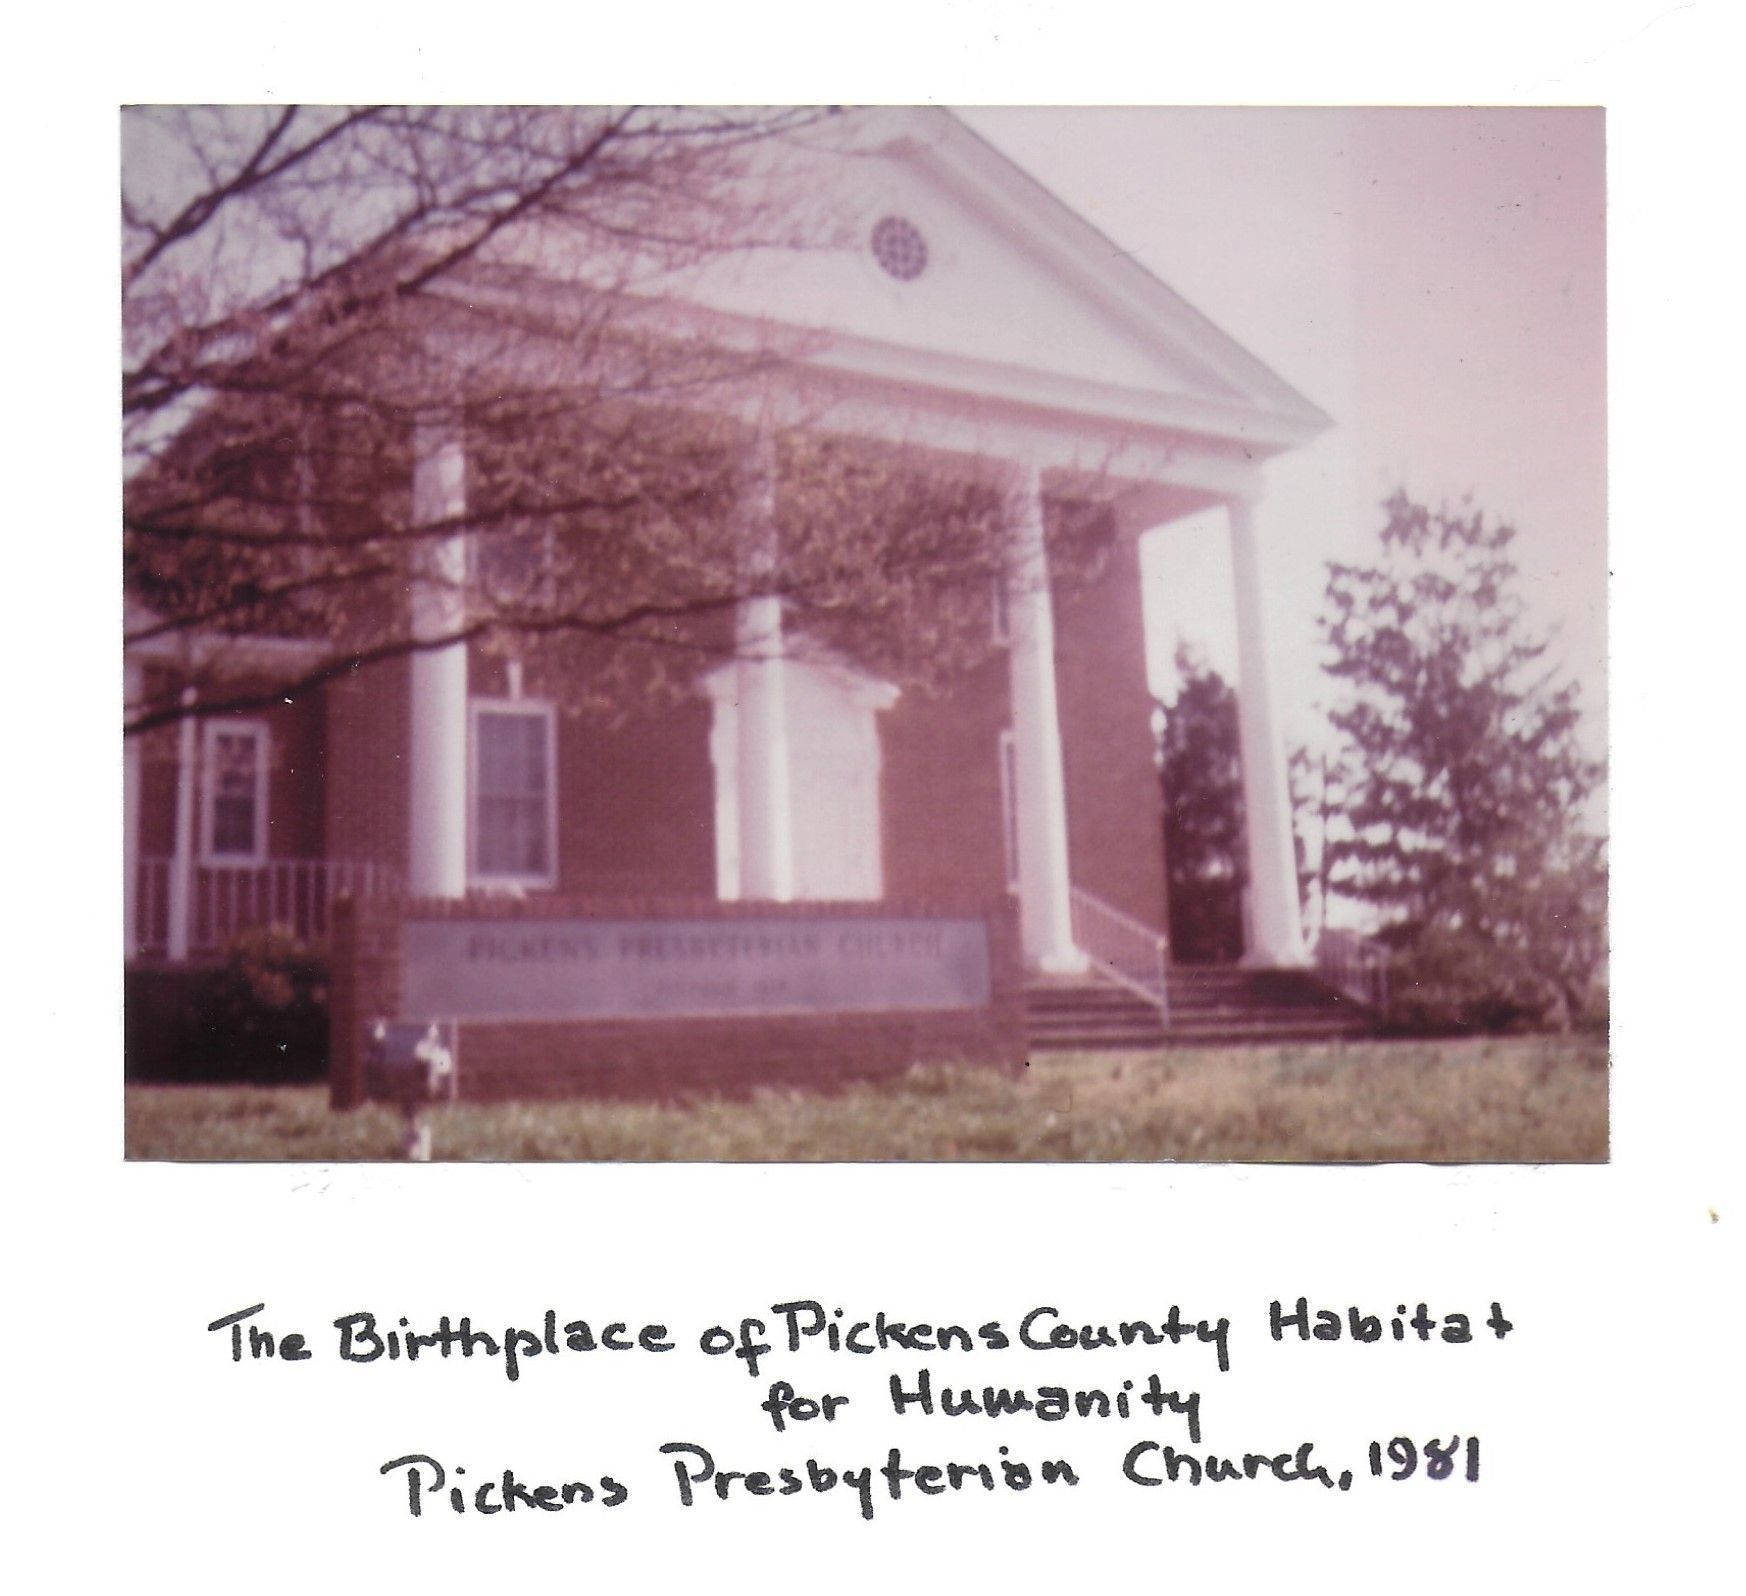 1981 – Pickens County Habitat for Humanity is formed.